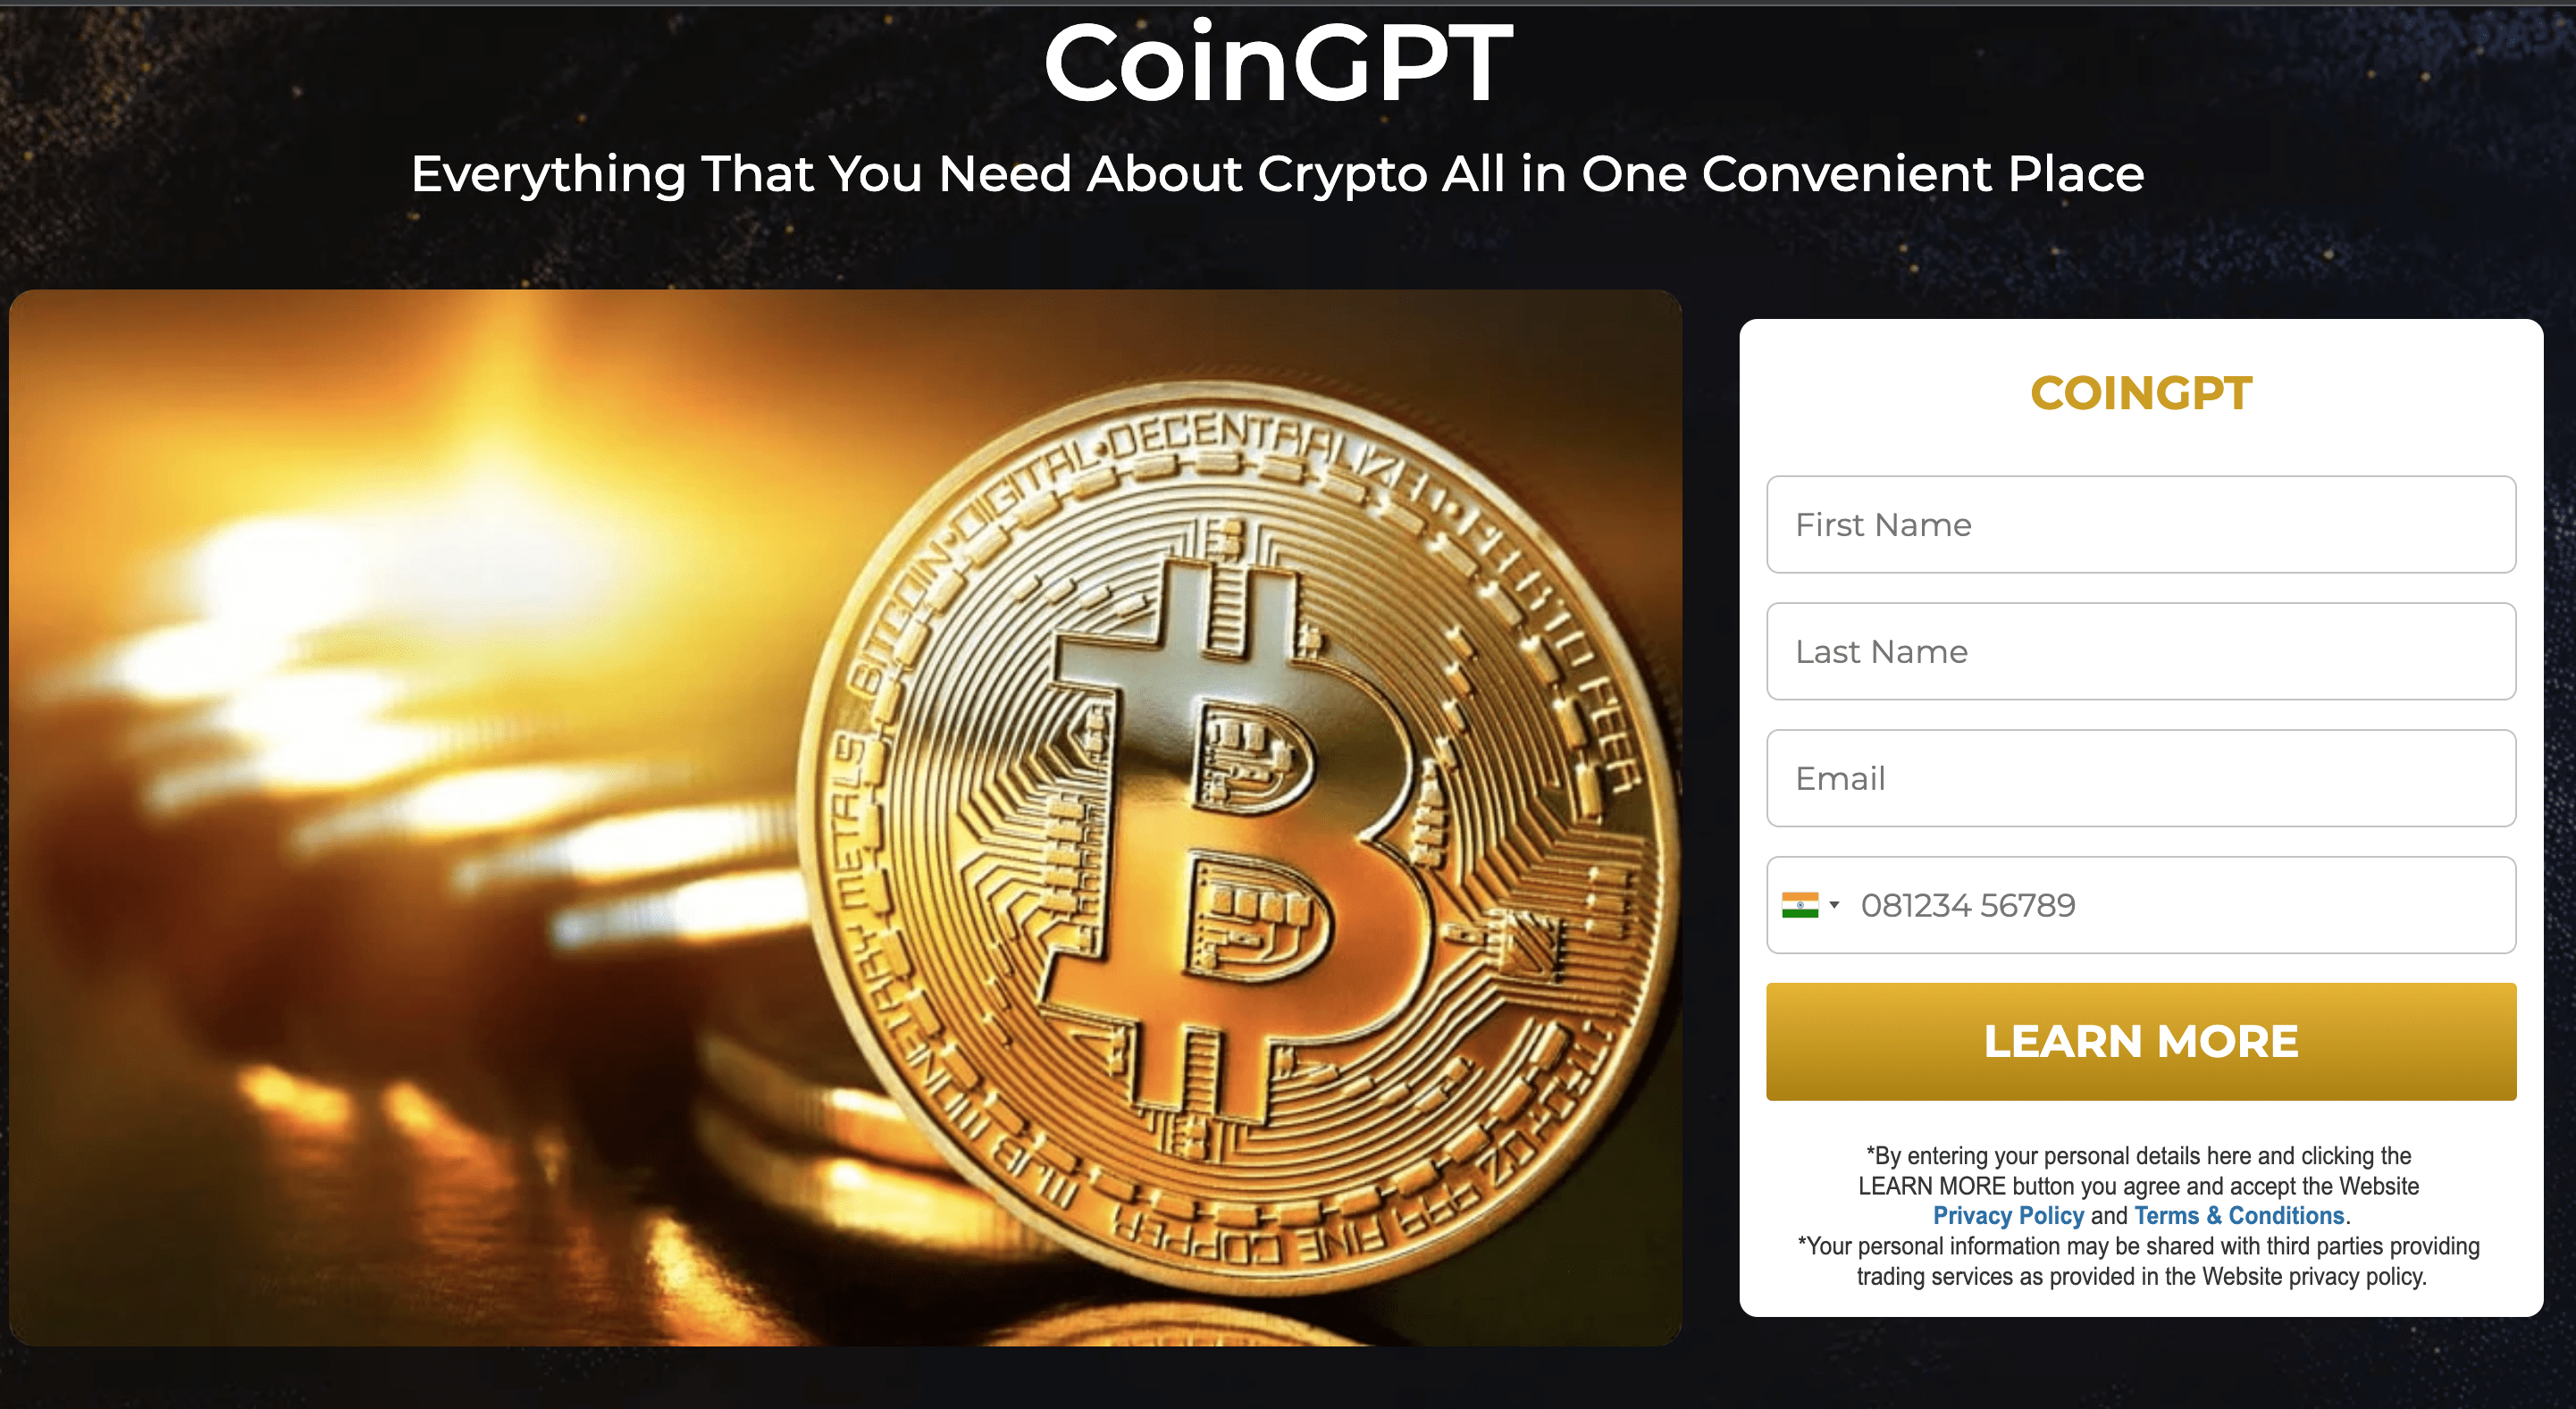 CoinGPT review